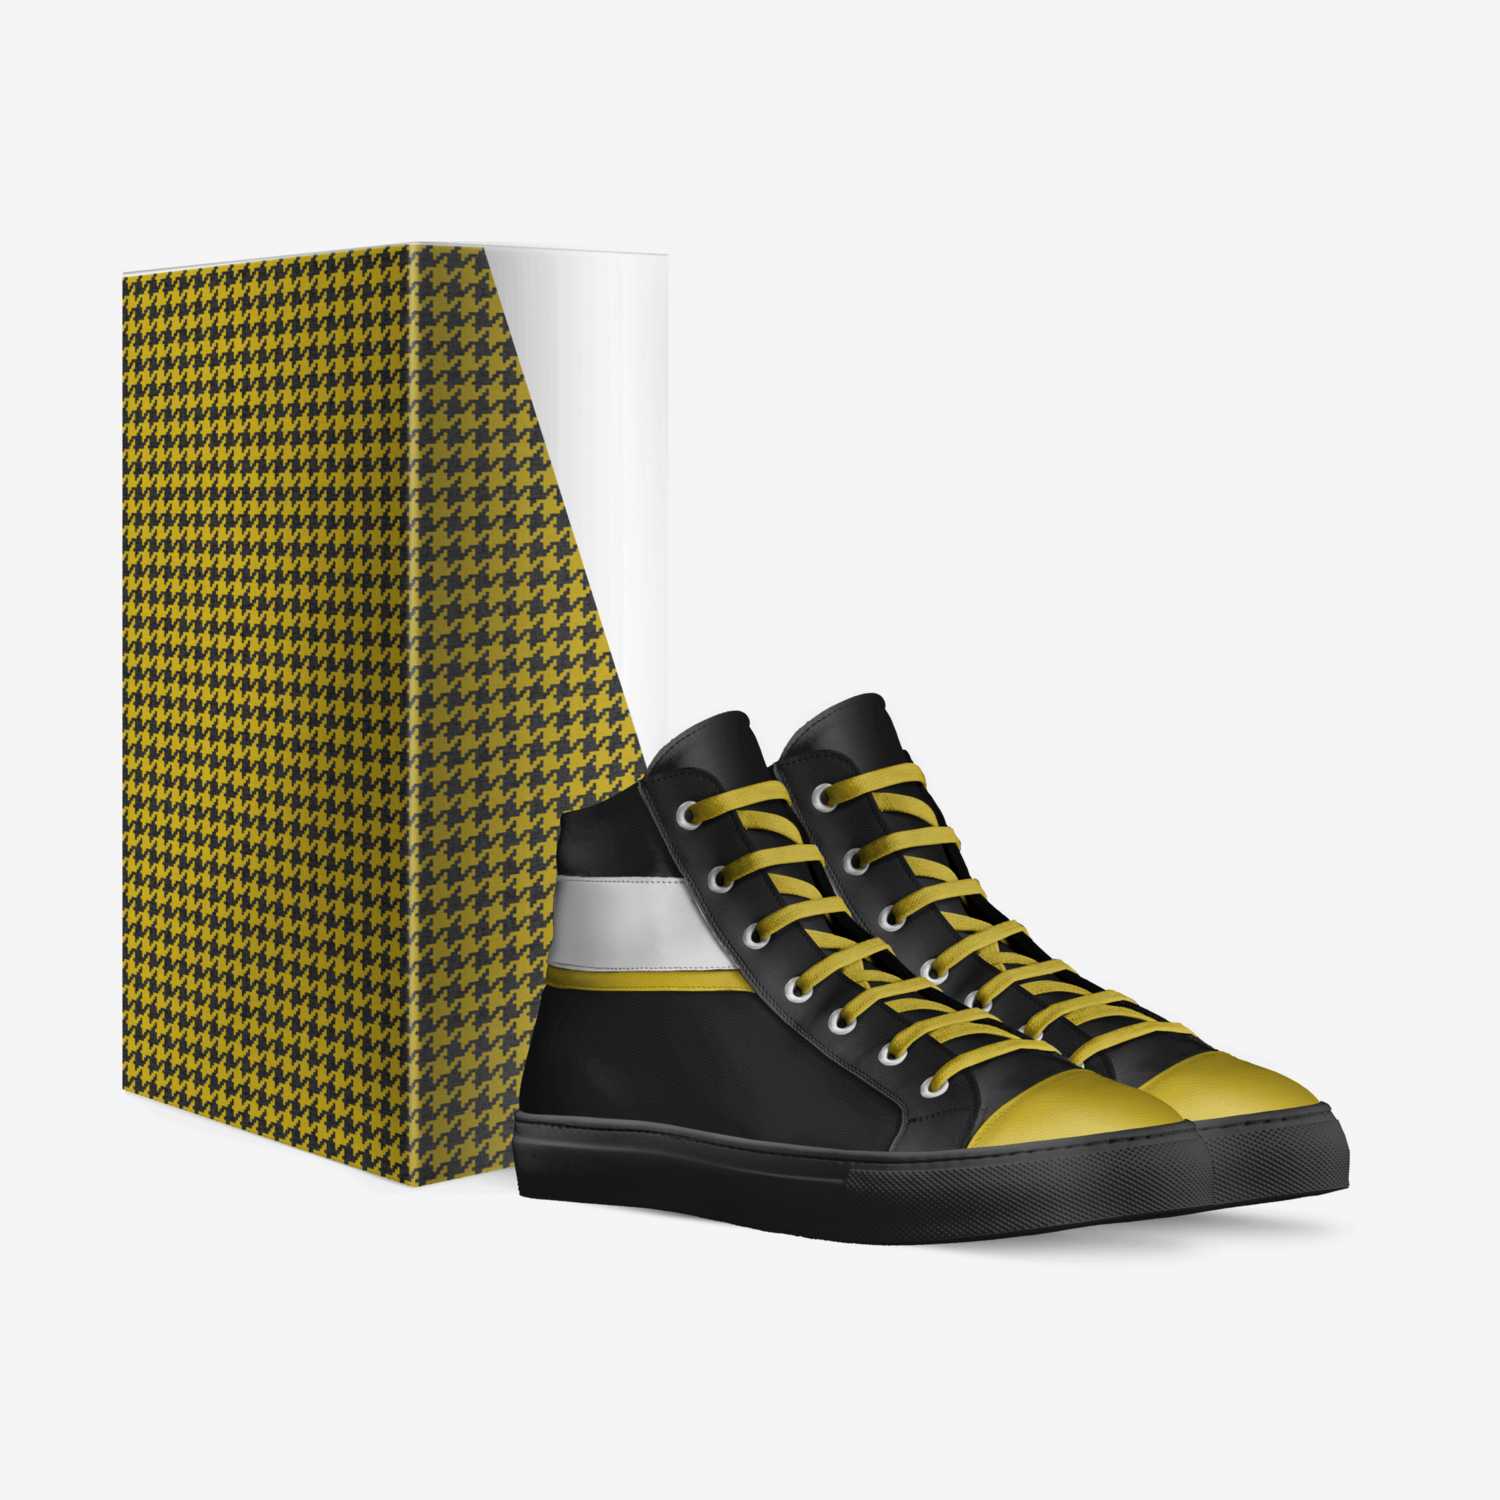 GC SERC7 custom made in Italy shoes by Le'Velle Lewis | Box view